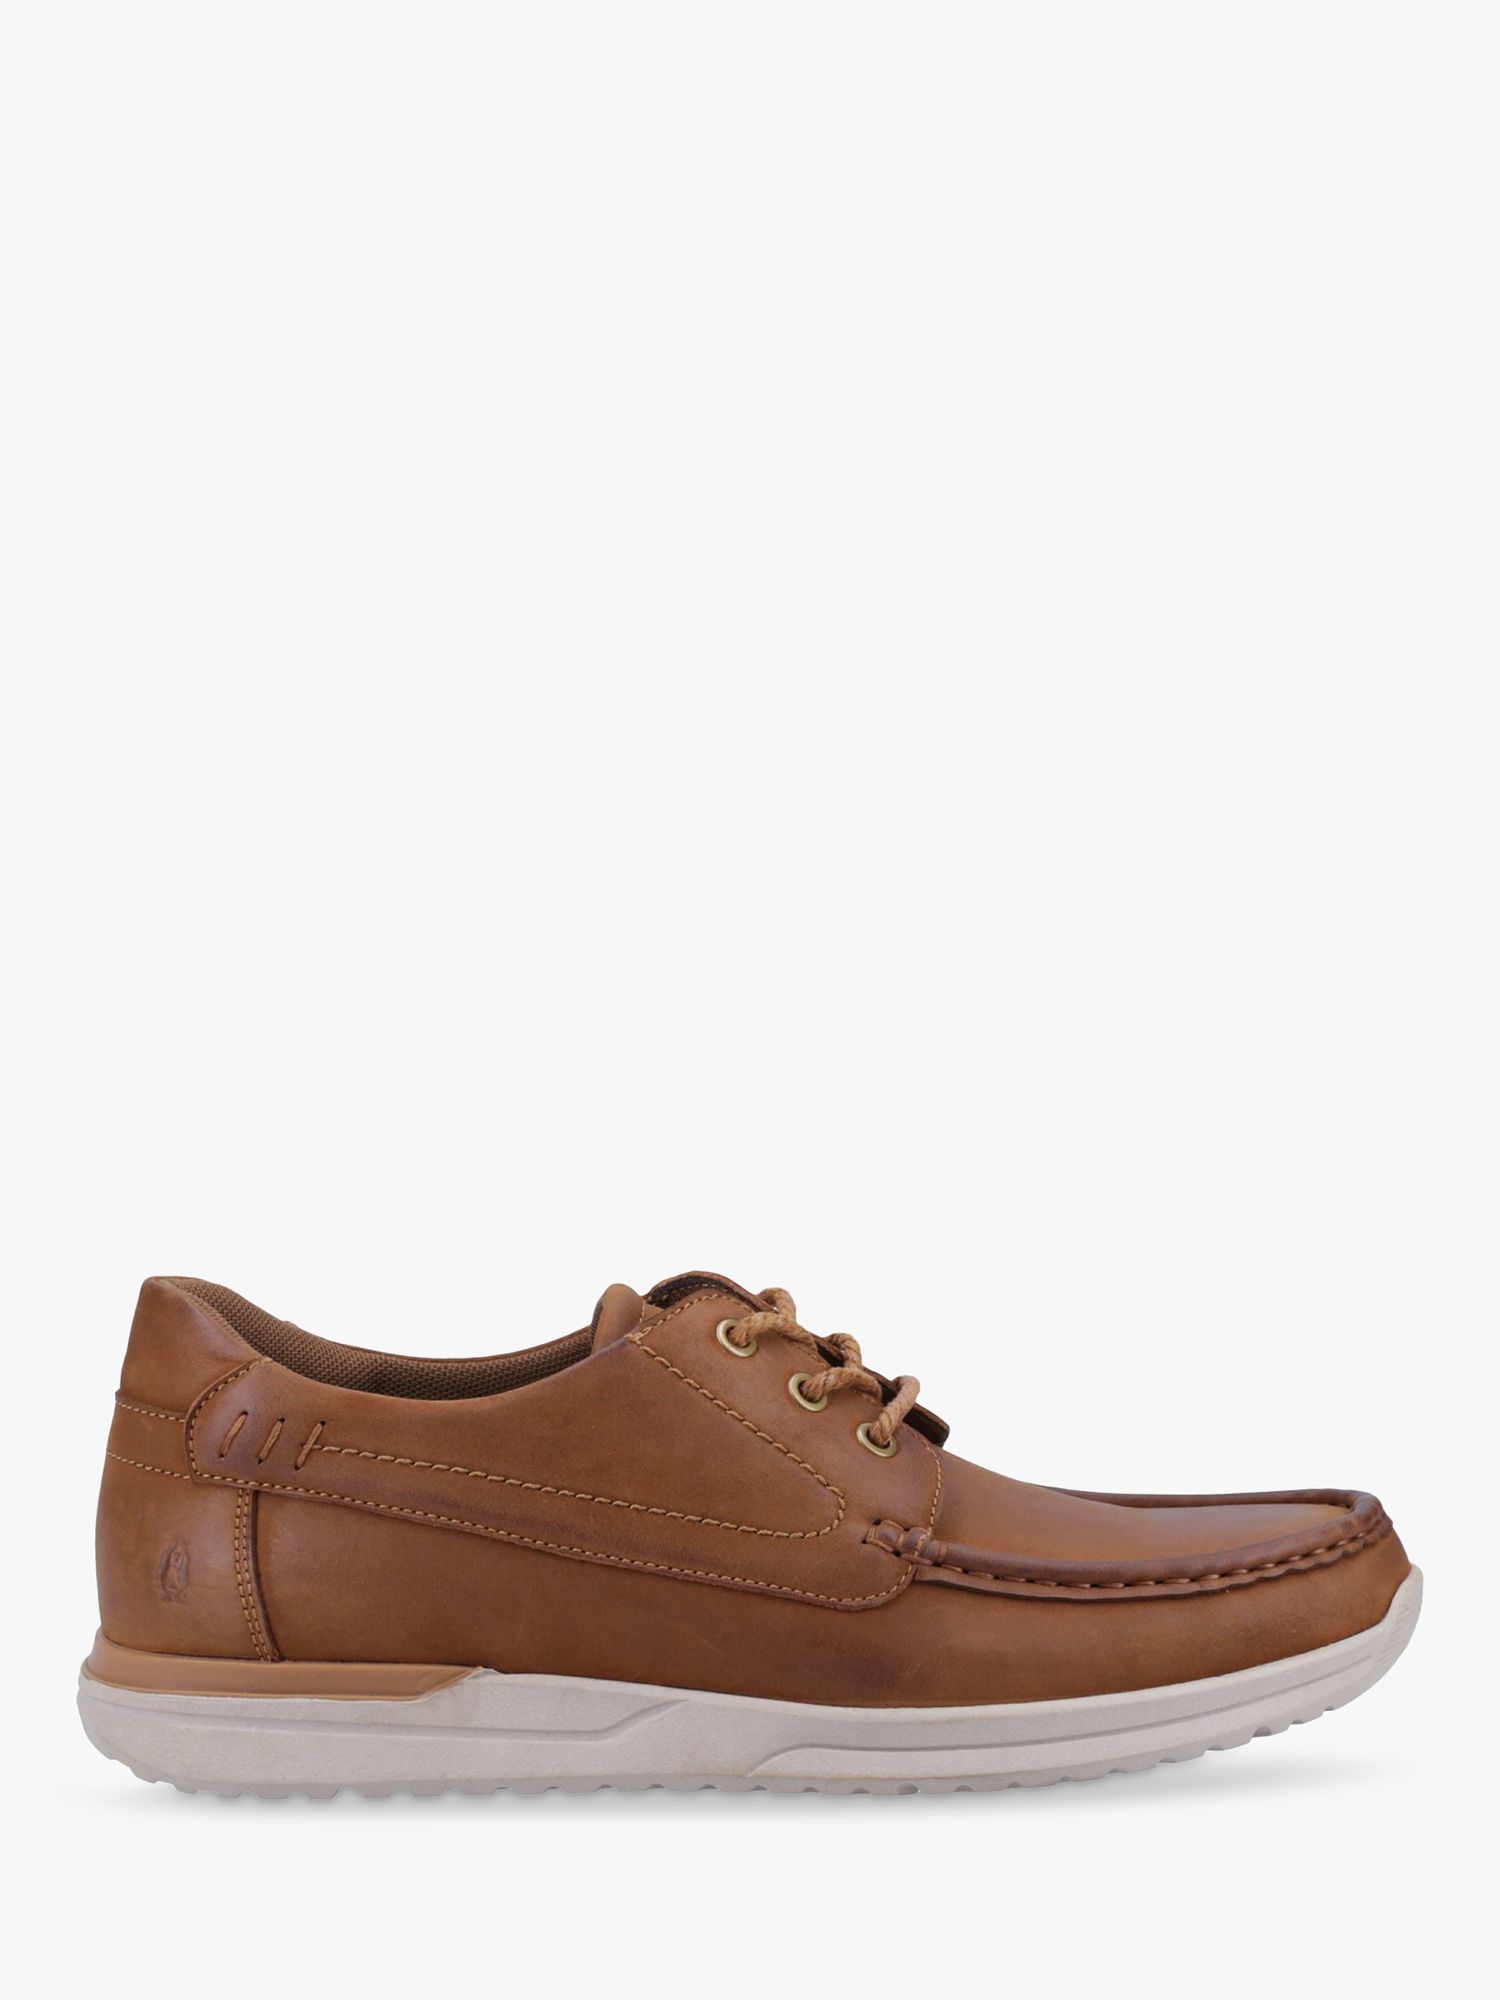 Hush Puppies Howard Leather Lace Up Shoes, Tan, 10